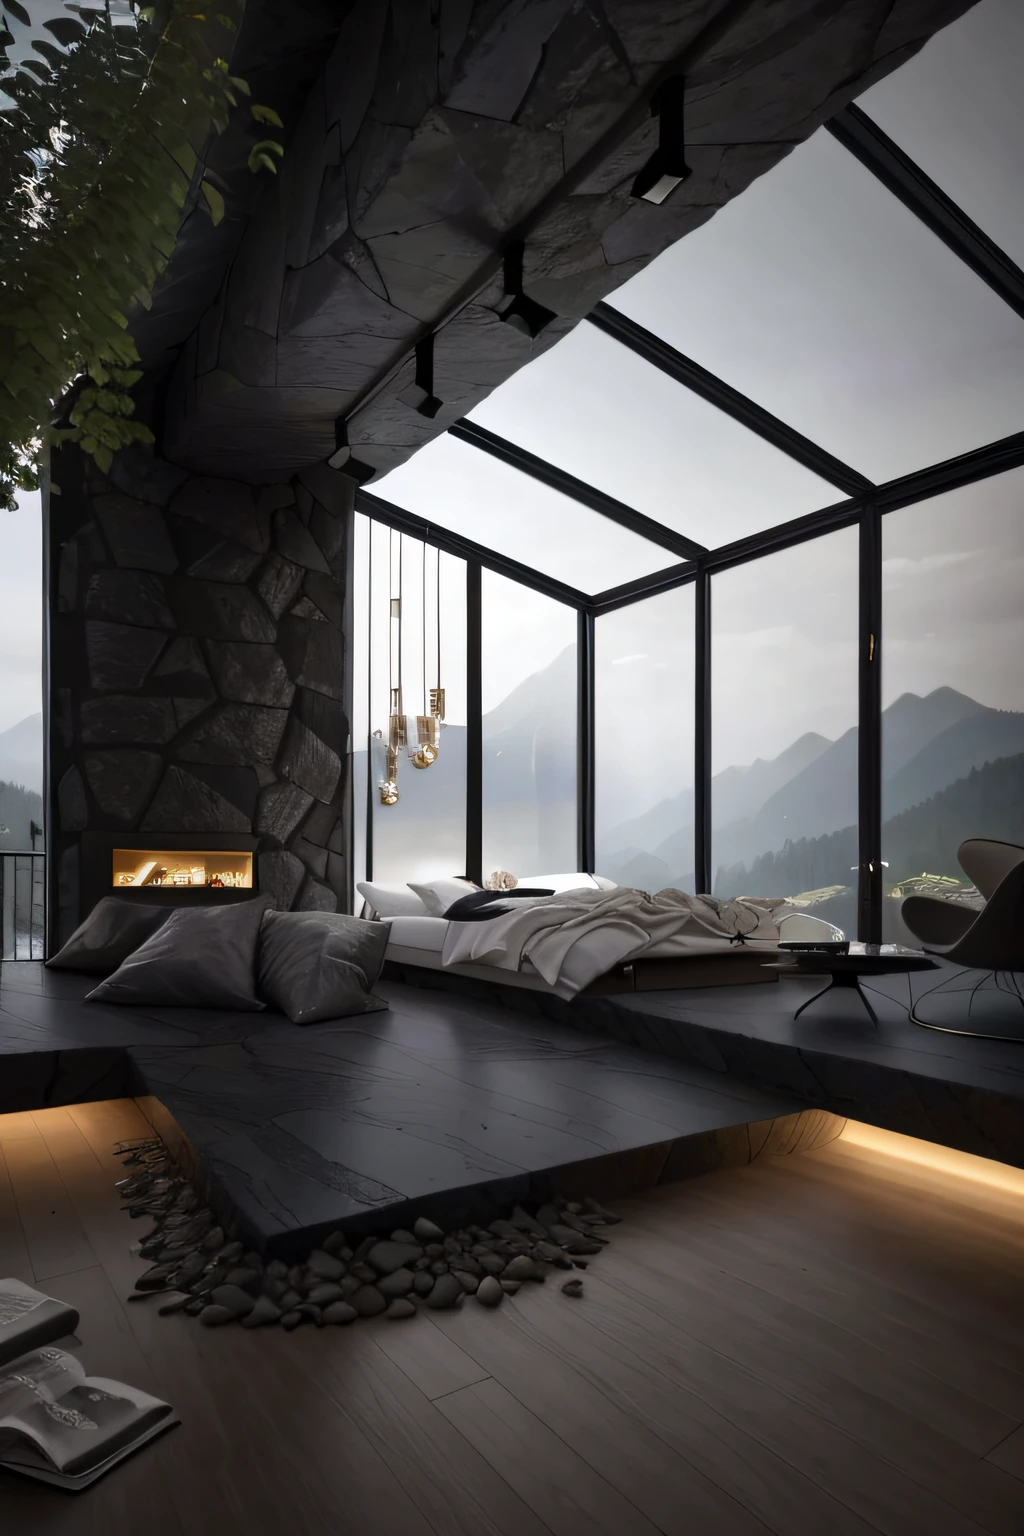 There is a large bedroom with fireplace and a bed, cozy place, integrated in the mountains, glass room, dark interior, Fog room, natural light in the room, relaxing environment, dark and modern, dark bedroom, cozy room, cozy and calm, luxurious environment, with backdrop of natural light, cosy atmoshpere, dark and moody aesthetic